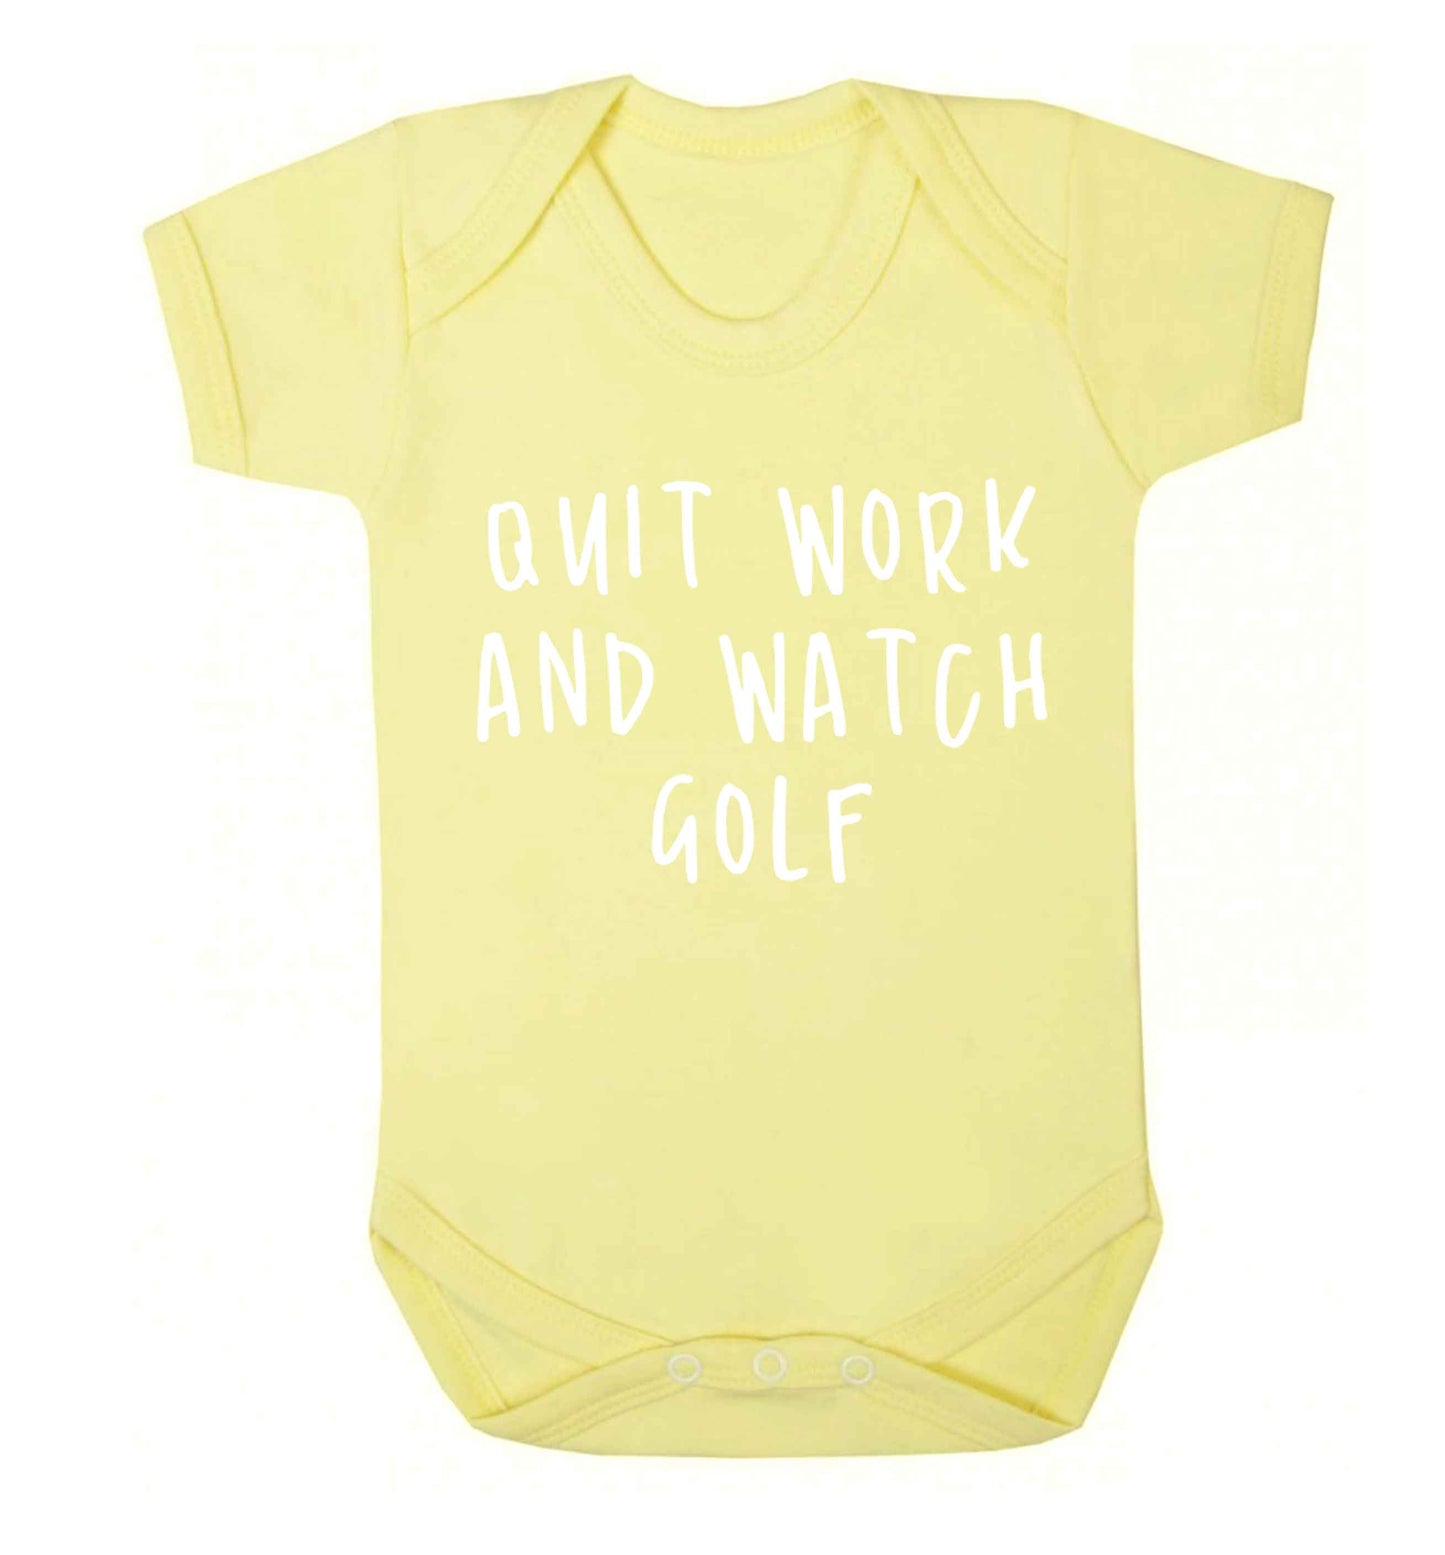 Quit work and watch golf Baby Vest pale yellow 18-24 months